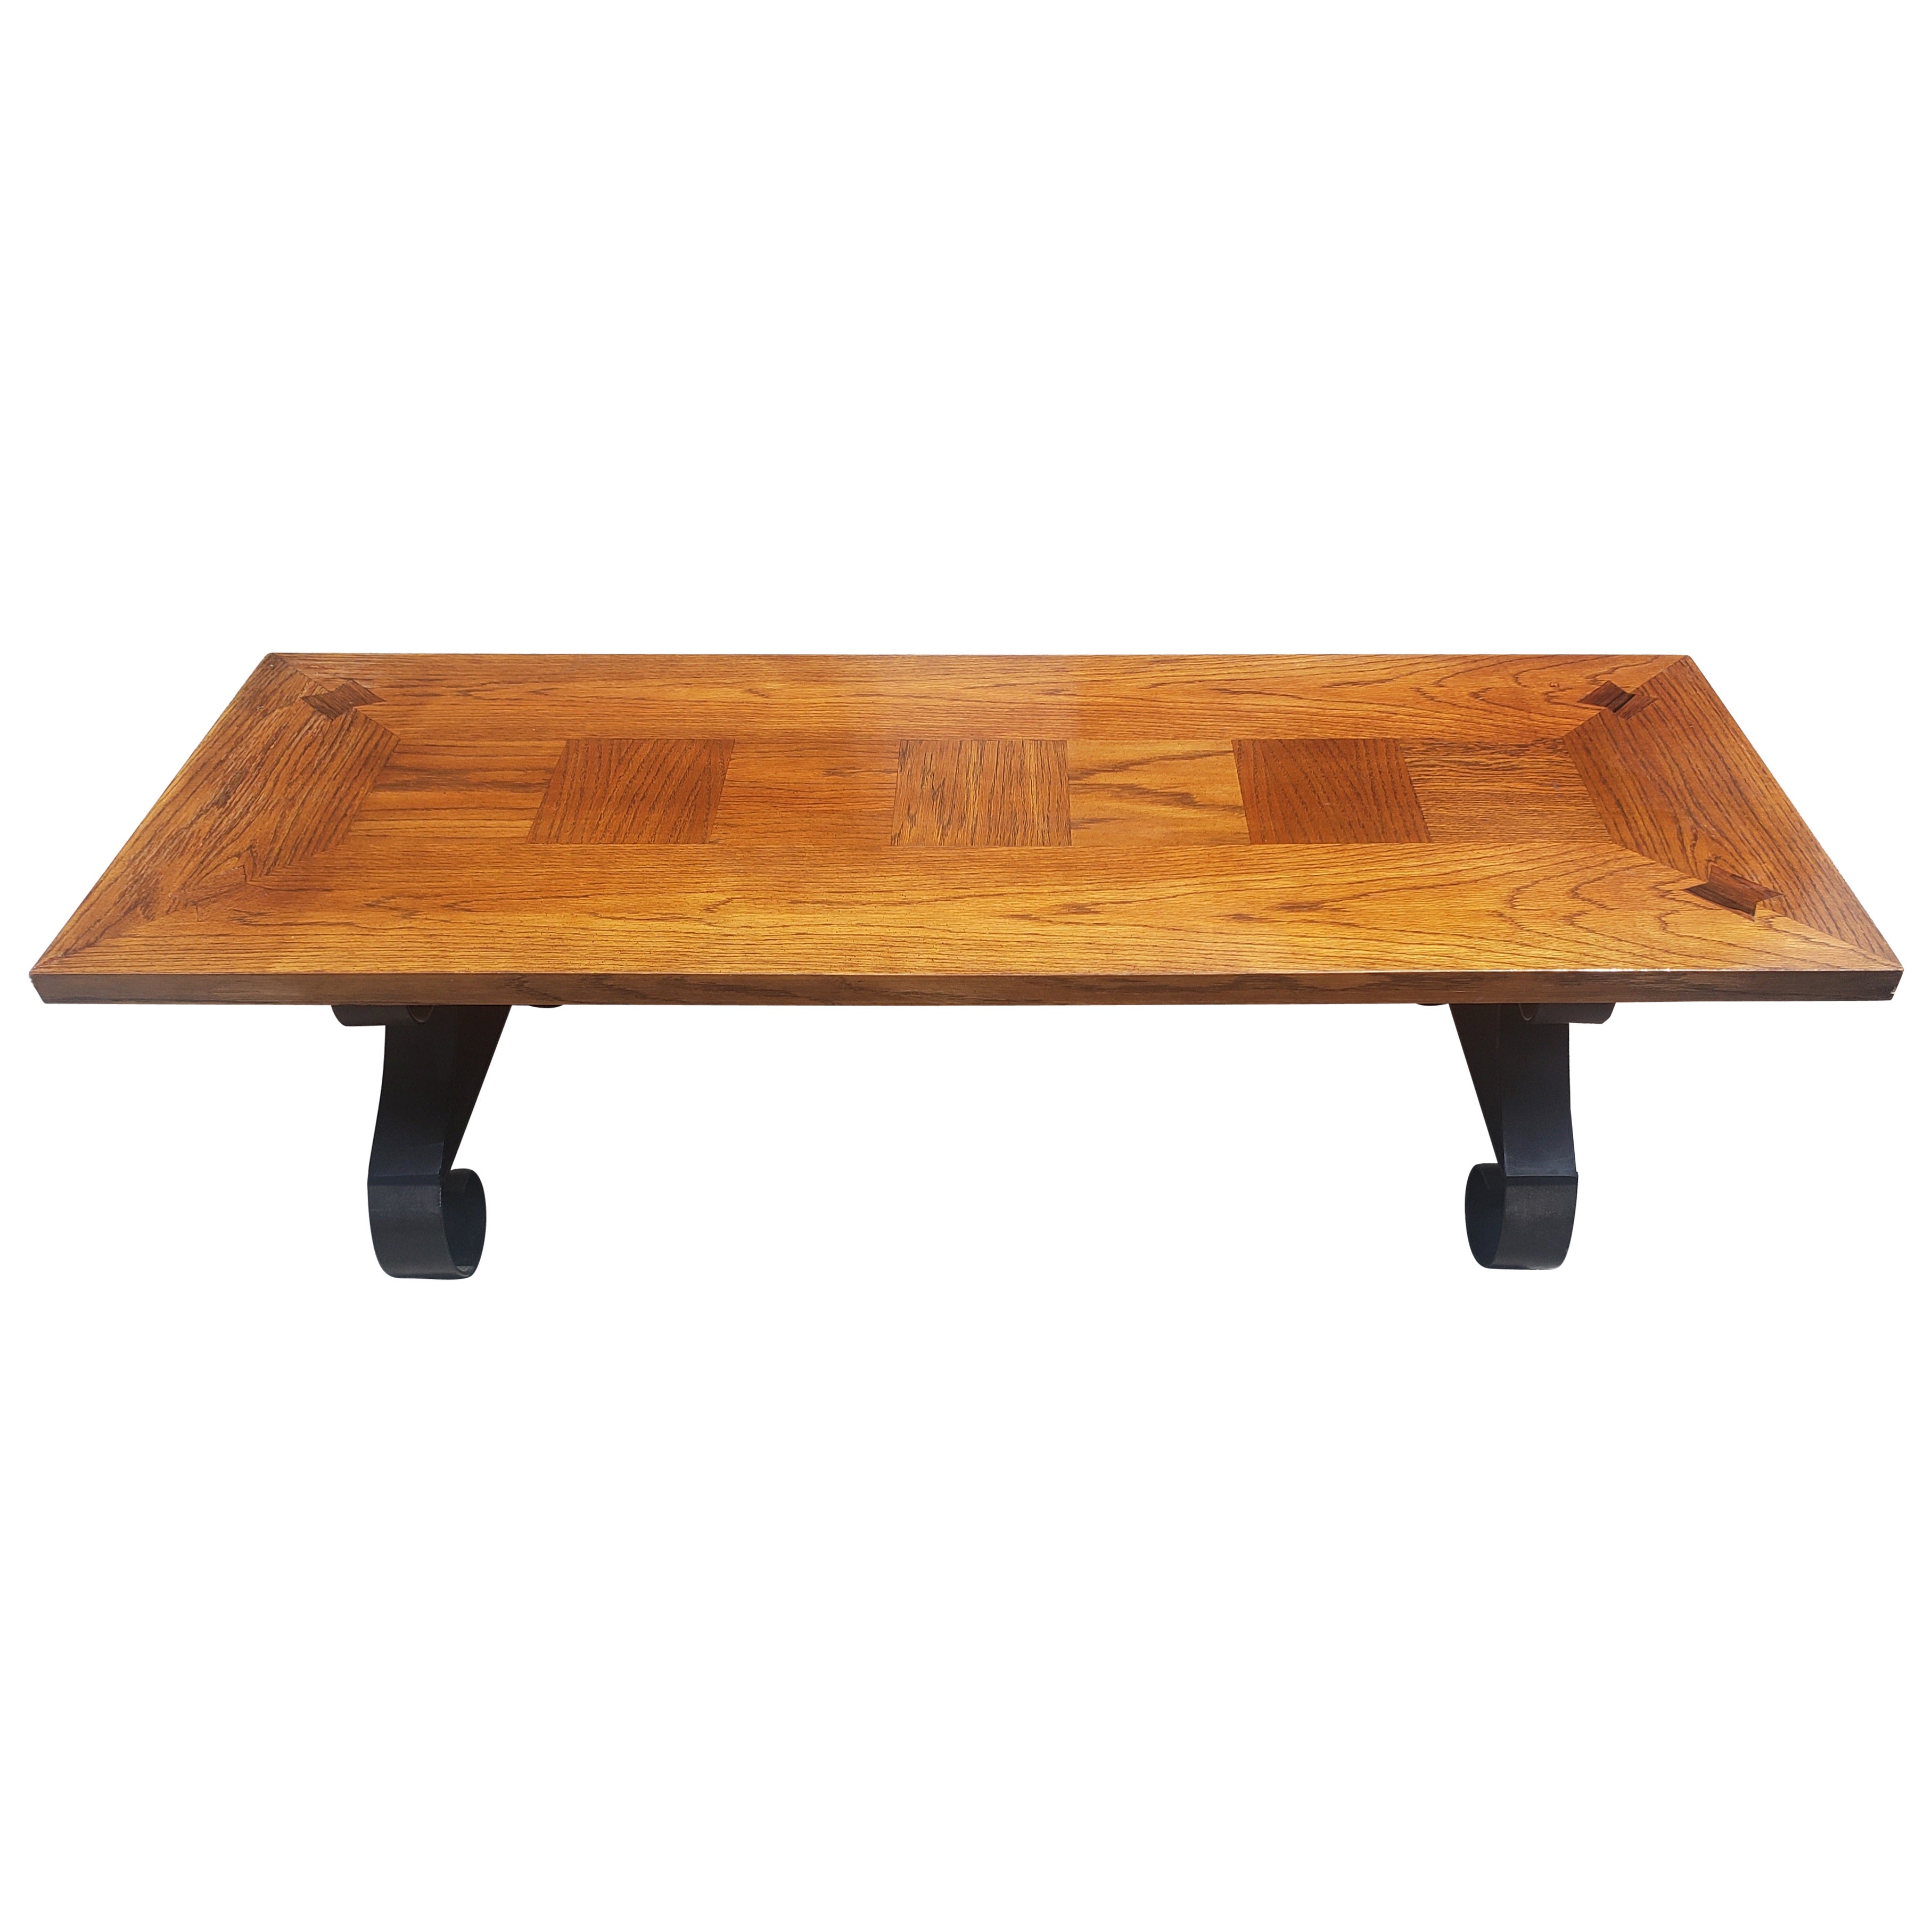 1960s Lane Furniture Brutalist Oak Parquetry and Iron Coffee Table For Sale